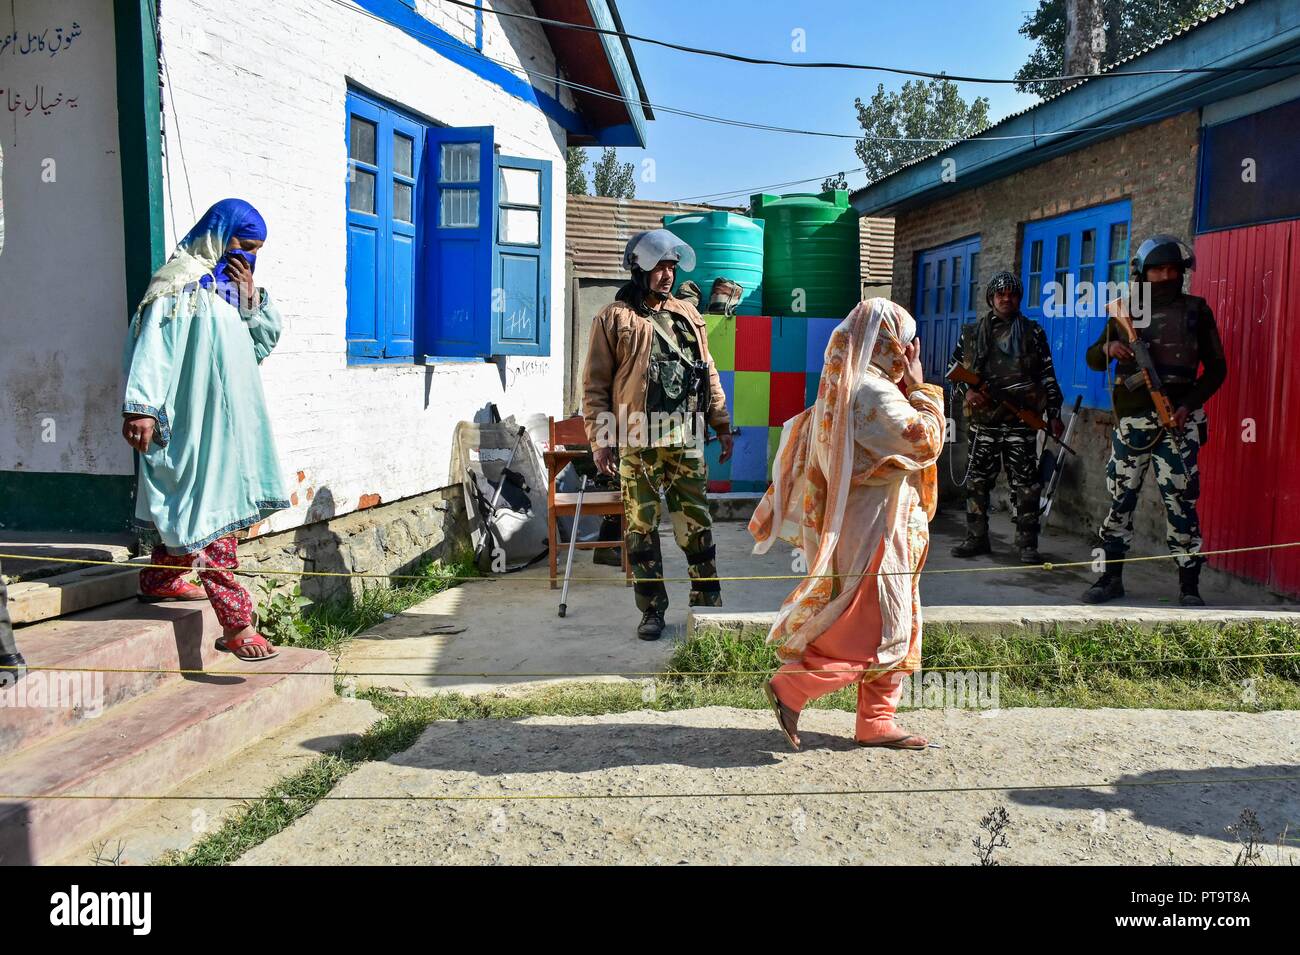 Kashmiri voters walk out of a voting booth at a polling station during the first phase of local elections in Srinagar, Indian administered Kashmir. Amid tight security arrangements, voting began for the first phase of the urban local bodies (ULB) elections in Jammu and Kashmir on 08 October. Stock Photo